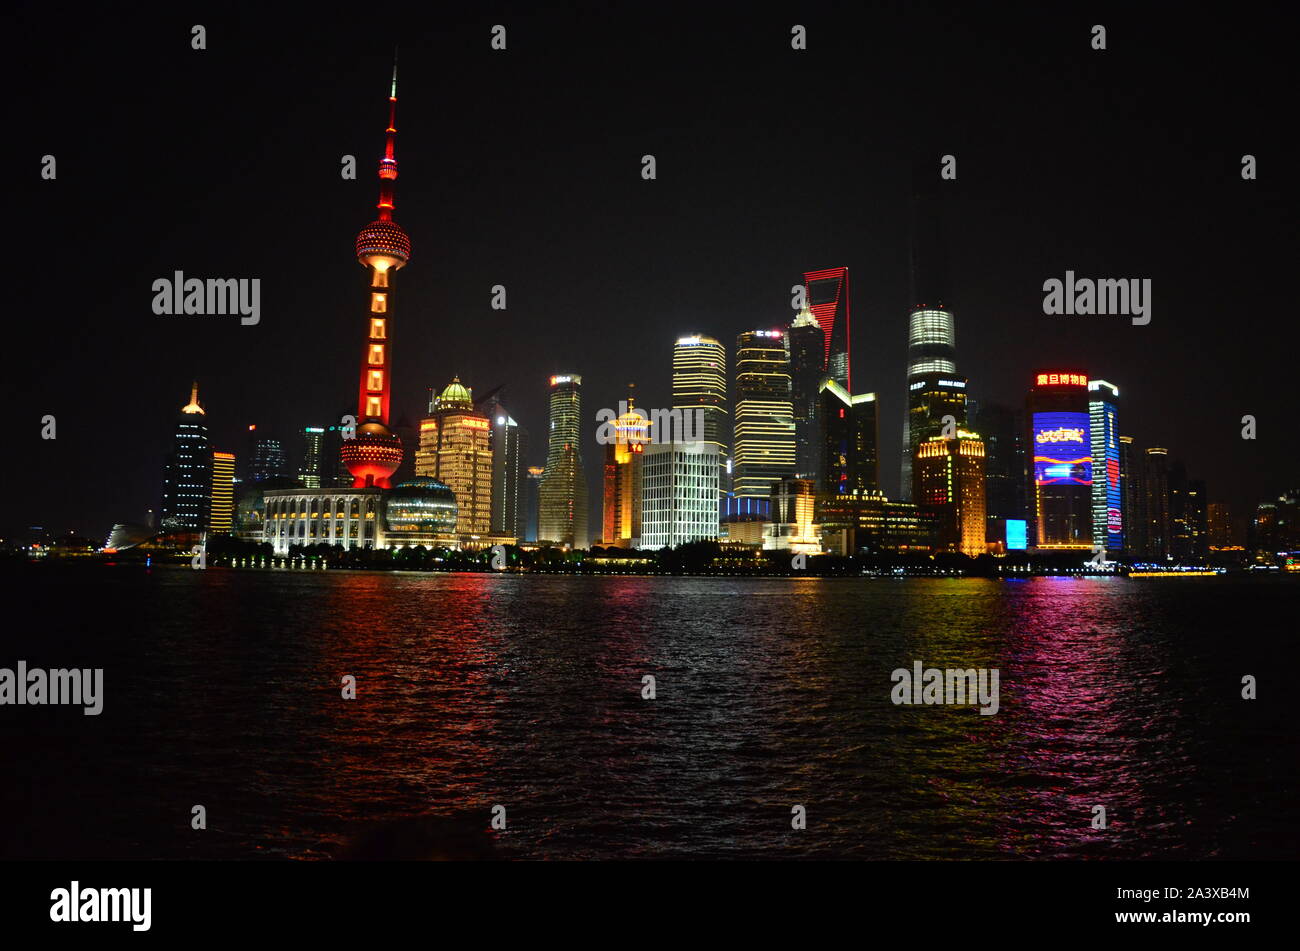 The view of the city skyline at night Stock Photo